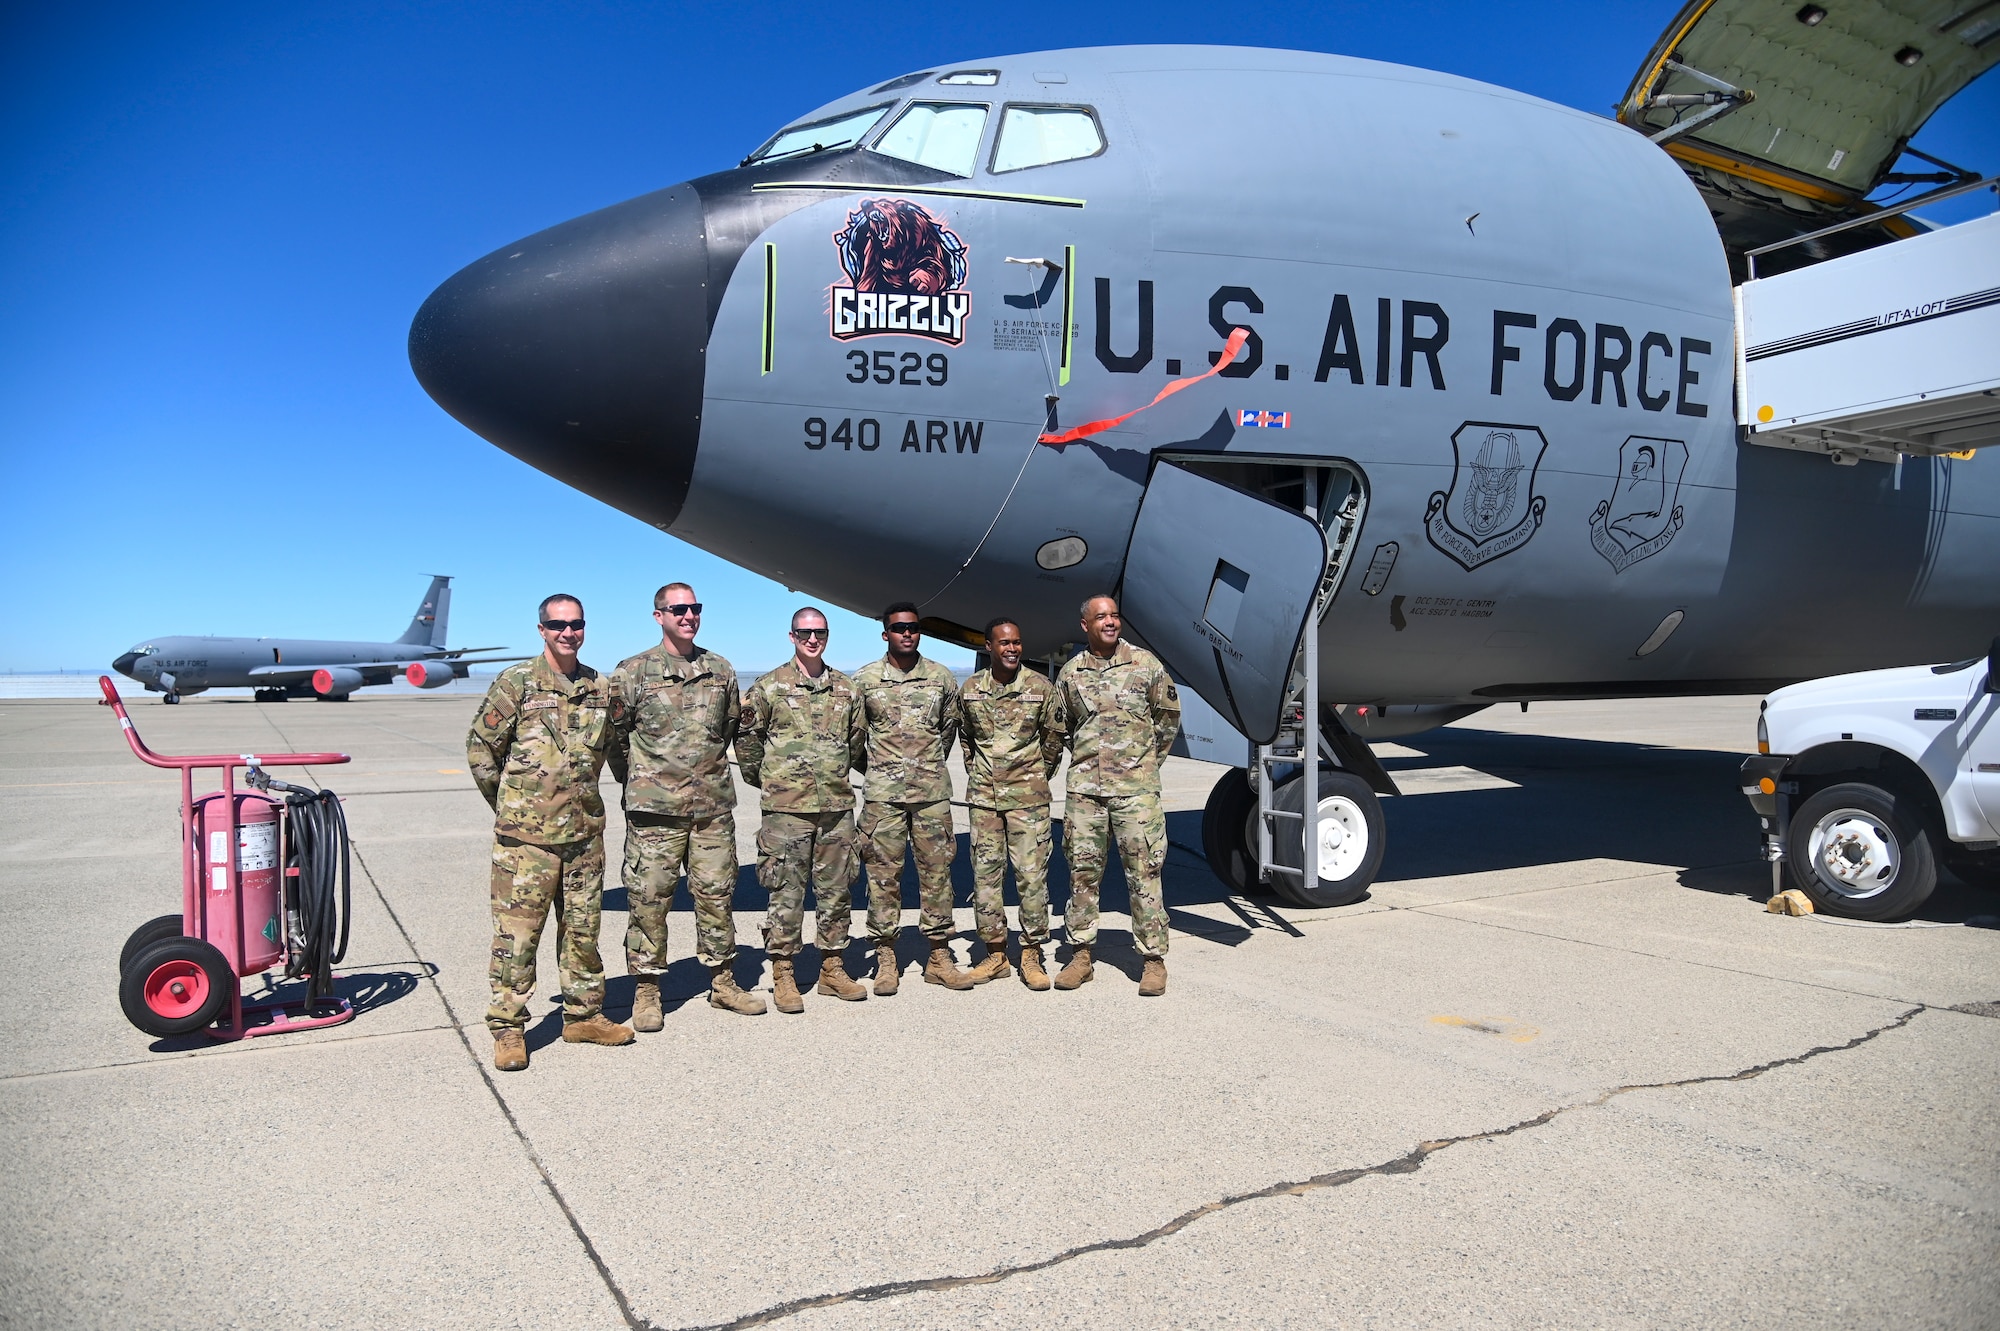 The crew chiefs assigned to the 940th Air Refueling Wing’s KC-135 Stratotanker, Grizzly, stand with leadership from the wing, Fourth Air Force and Air Force Reserve Command June 13, 2021, at Beale Air Force Base, California.